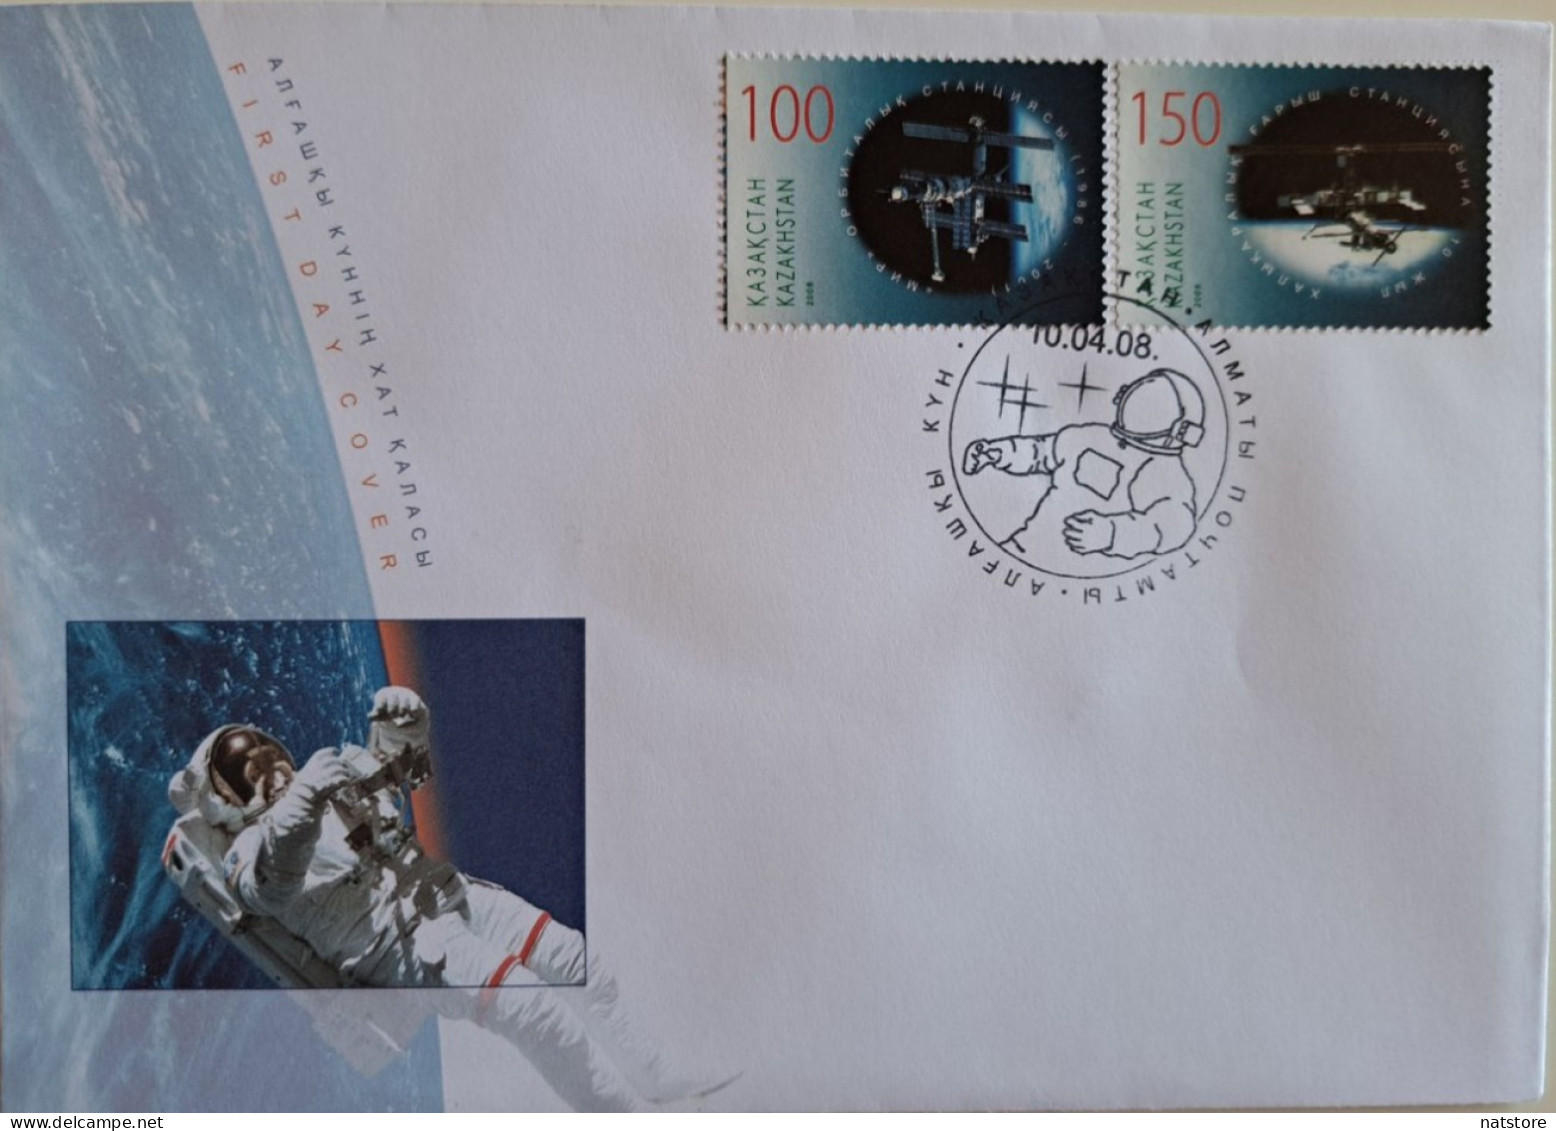 2008..KAZAKHSTAN...FDC WITH  STAMPS...NEW...Cosmonautics Day.....RARE!!! - Asien